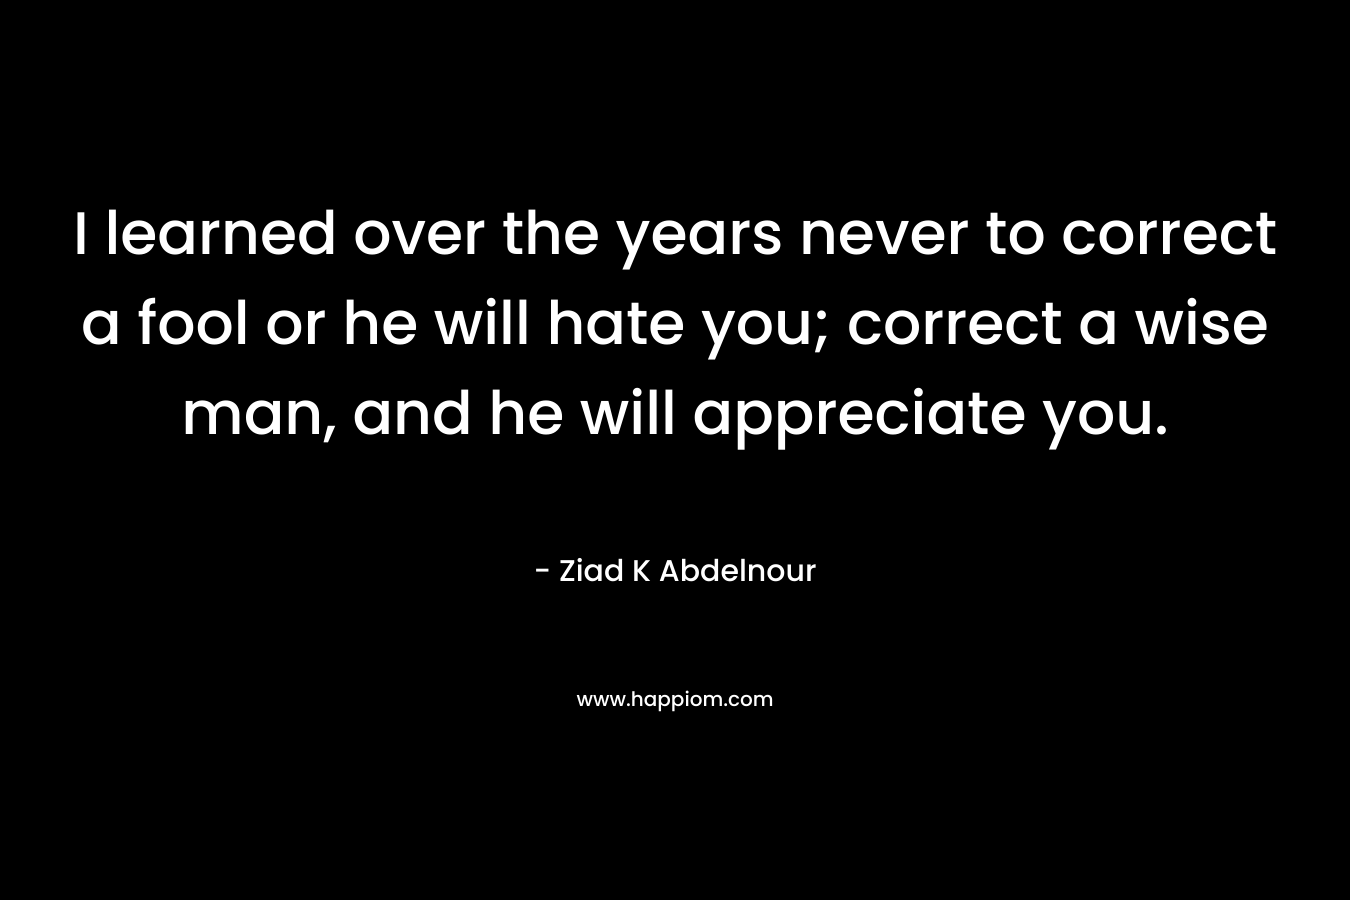 I learned over the years never to correct a fool or he will hate you; correct a wise man, and he will appreciate you.